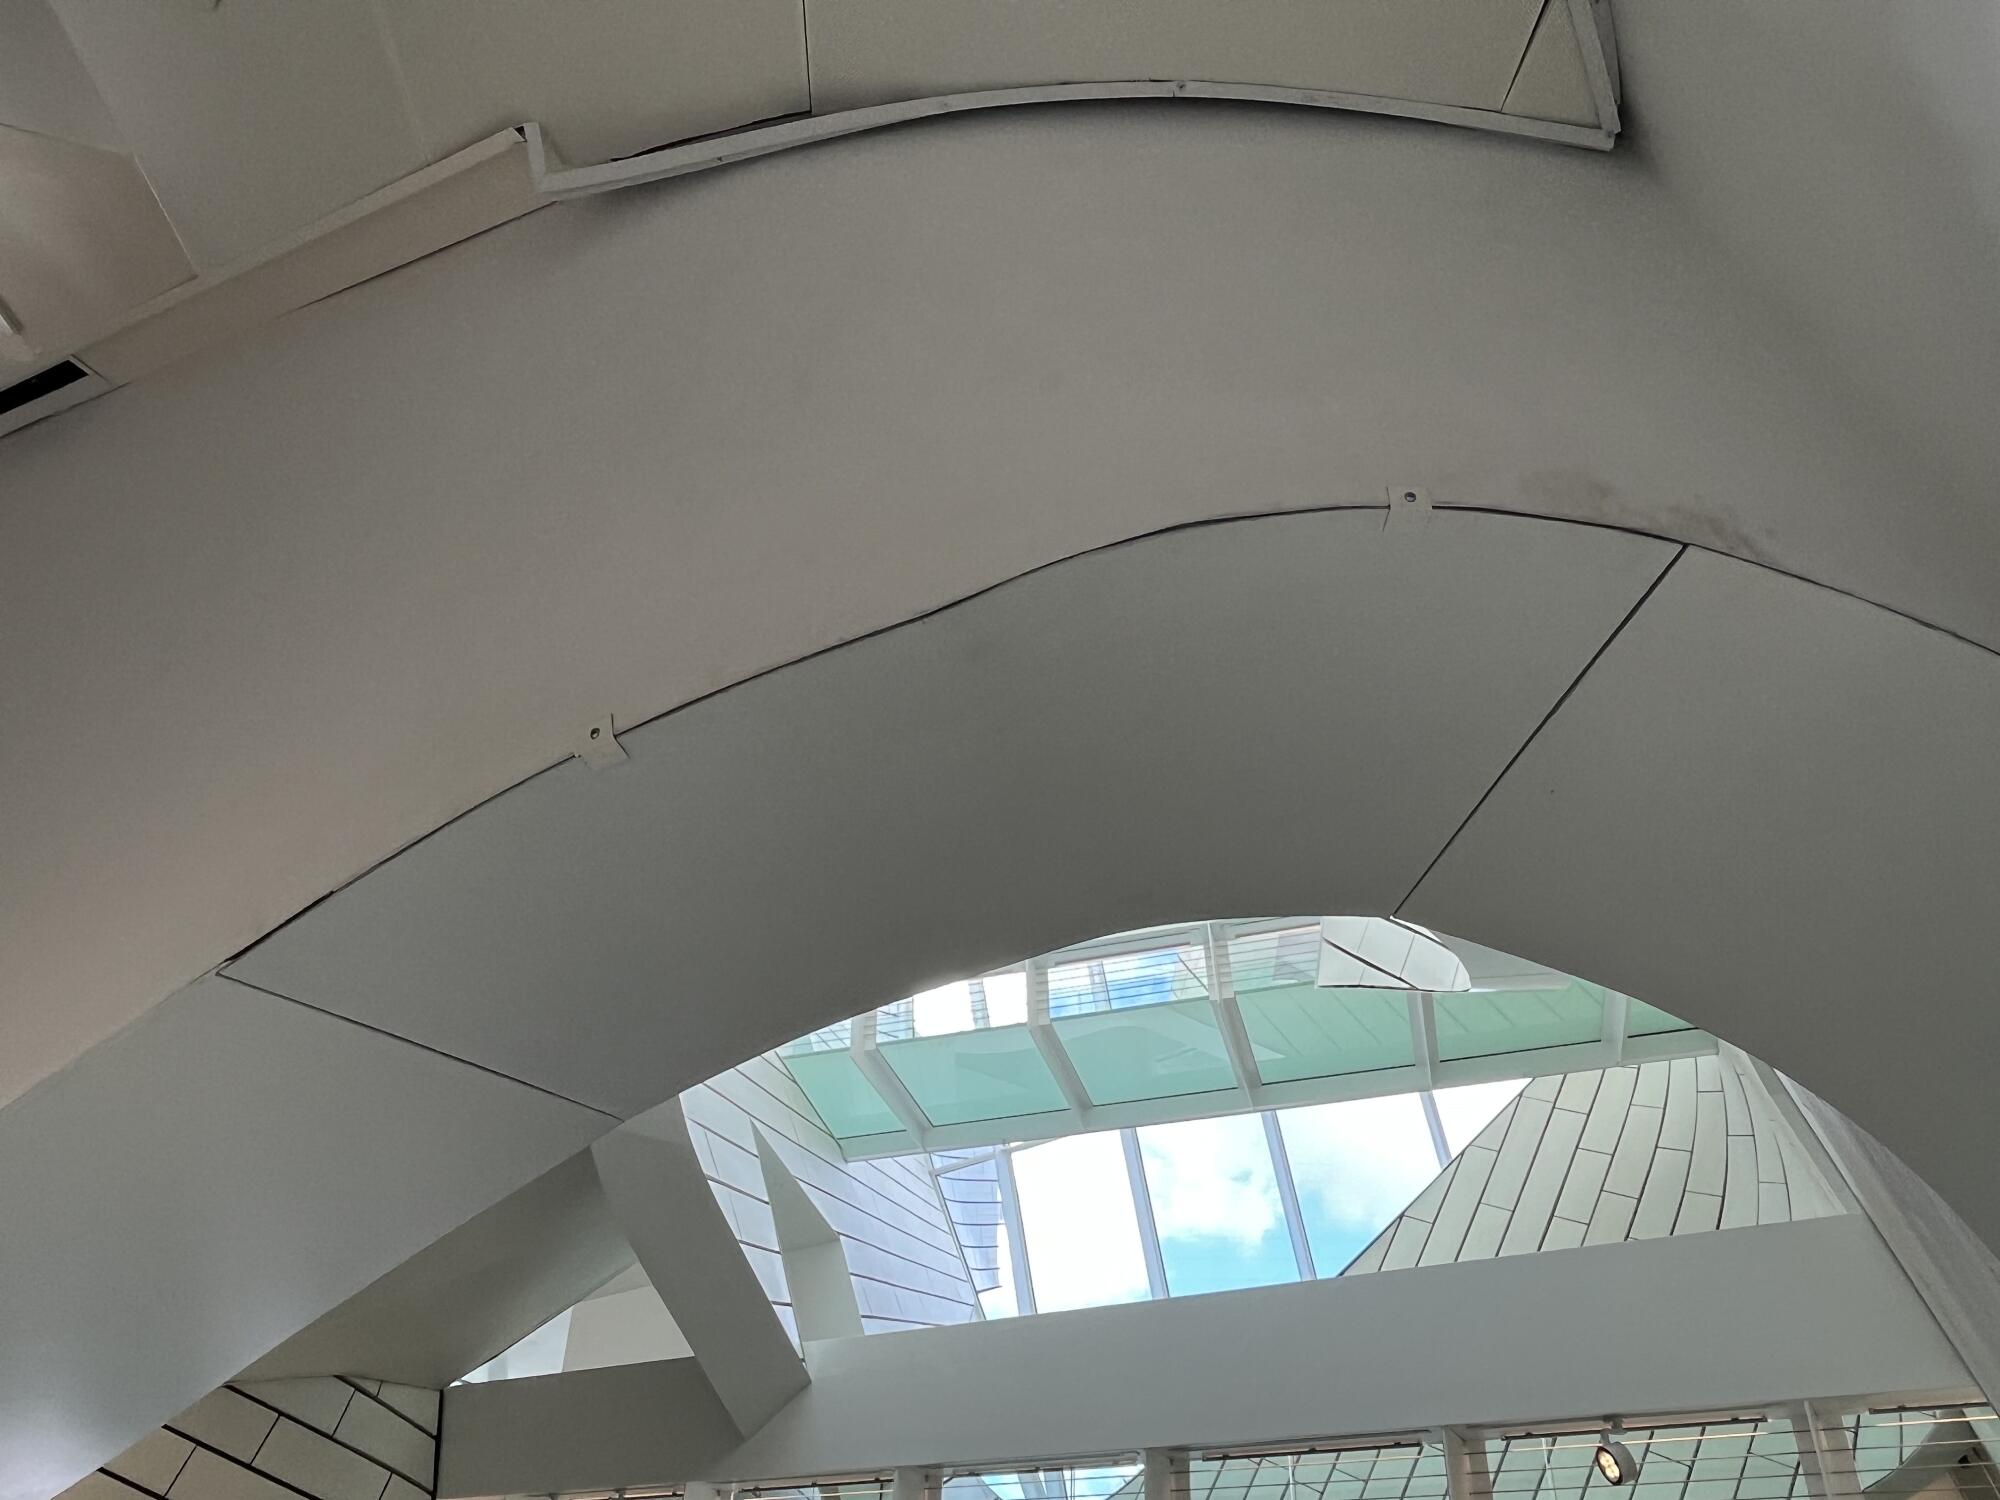 A view of a bend in a ceiling arch reveals poorly aligned boards clamped together in lieu of steel panels.